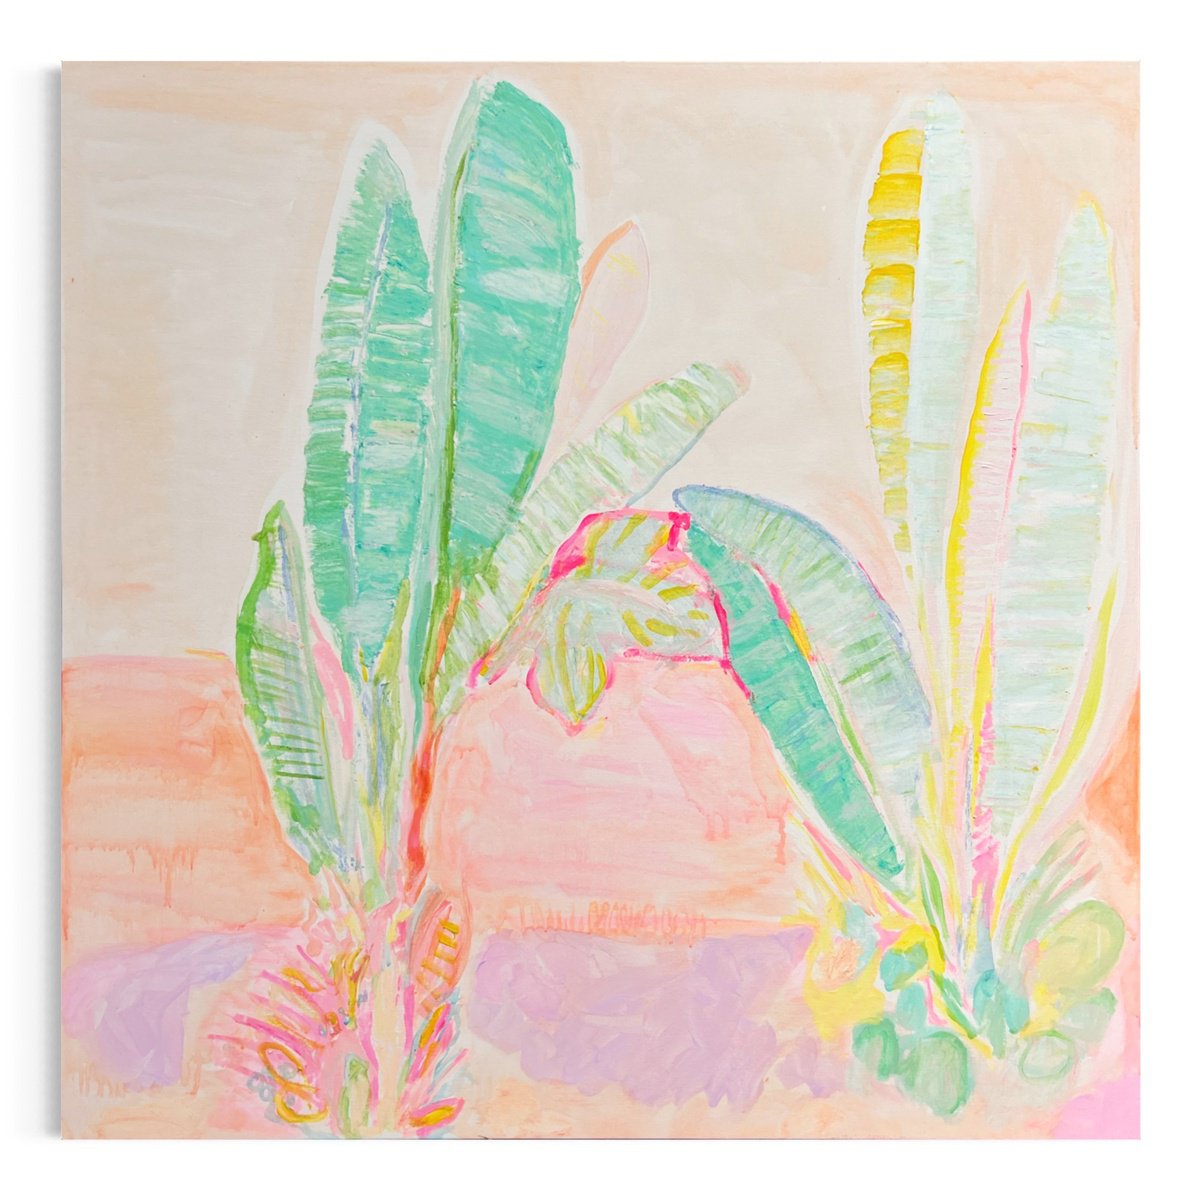 ’Red Sunset Banana Leaves Study’ by Kathryn Sillince